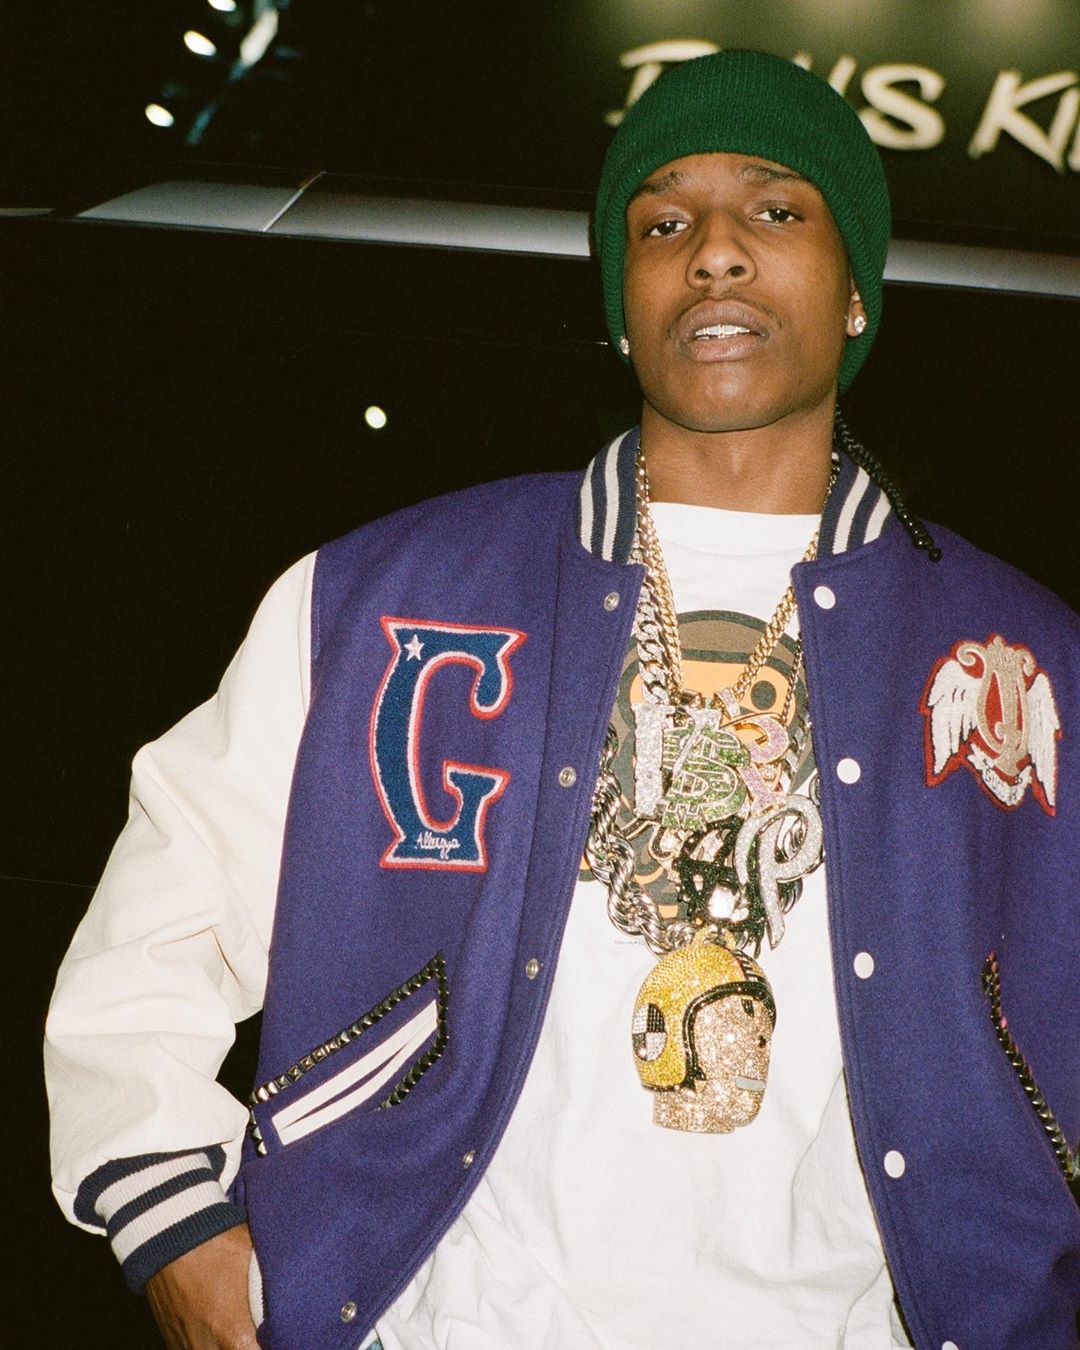 SPOTTED: ASAP Rocky Dons Gucci Varsity Jacket in London